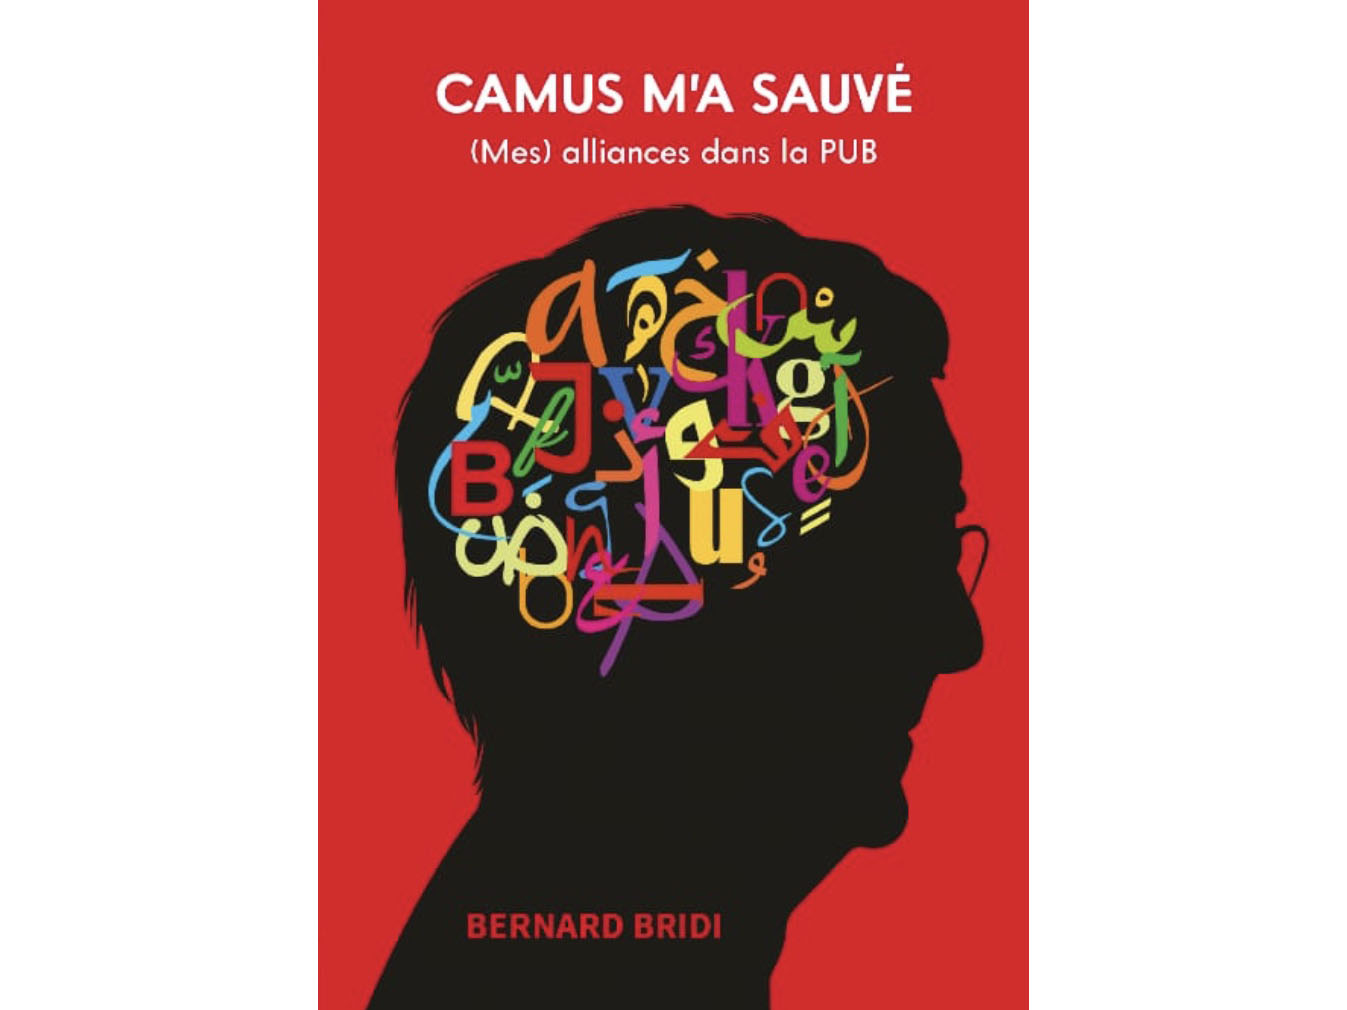 Adman Bernard Bridi publishes new book that reads like a thriller